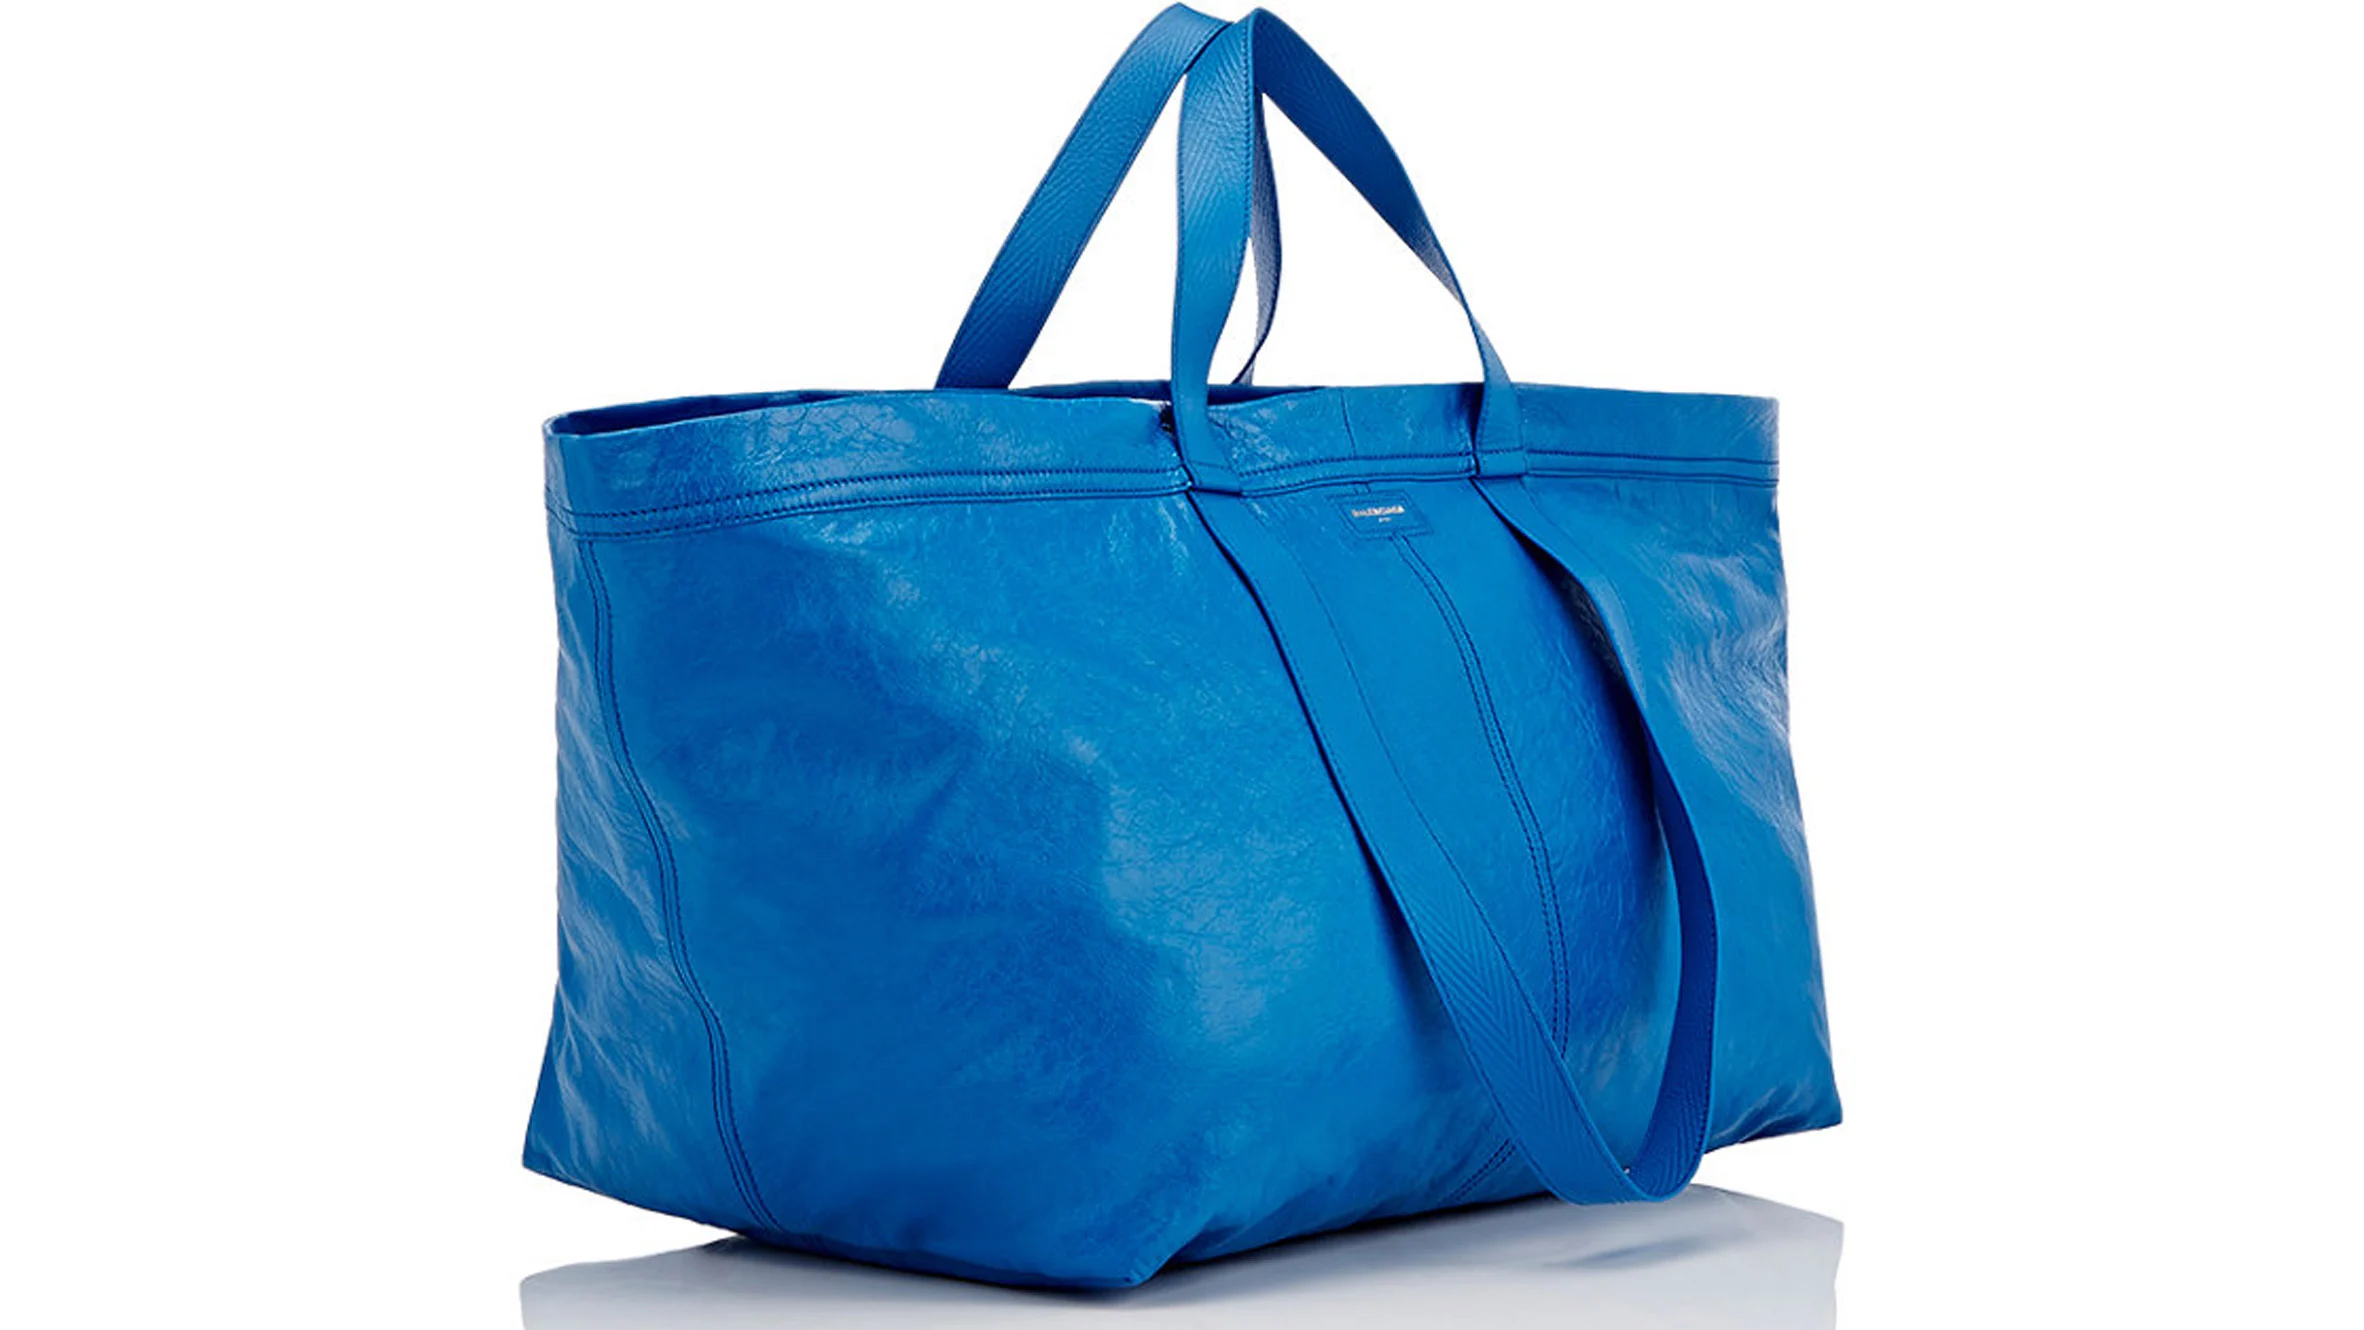 If anyone misses the classic Tesco carrier bags, why not pick up the  Balenciaga Monday Shopper. A Steal at £925. : r/CasualUK